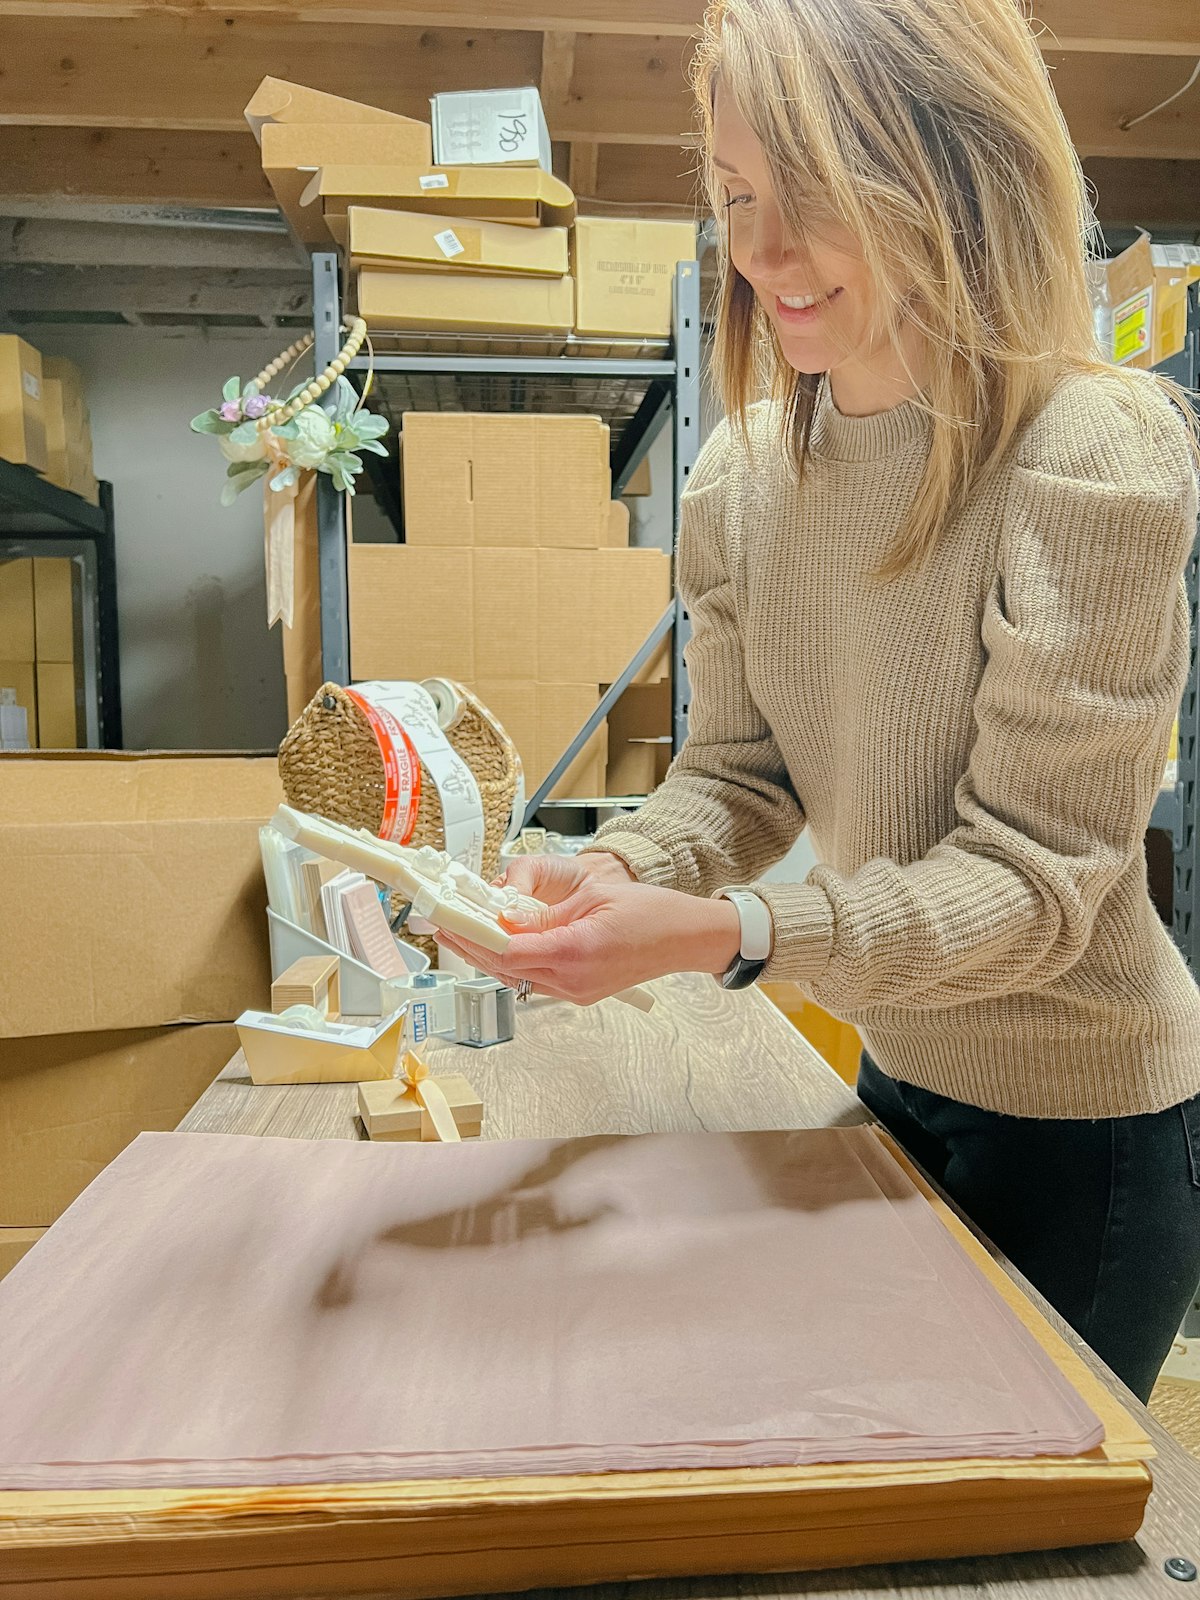 Tabitha Kidman works to package items in her basement warehouse to ship to customers who purchased through her online "House of Joppa" store.